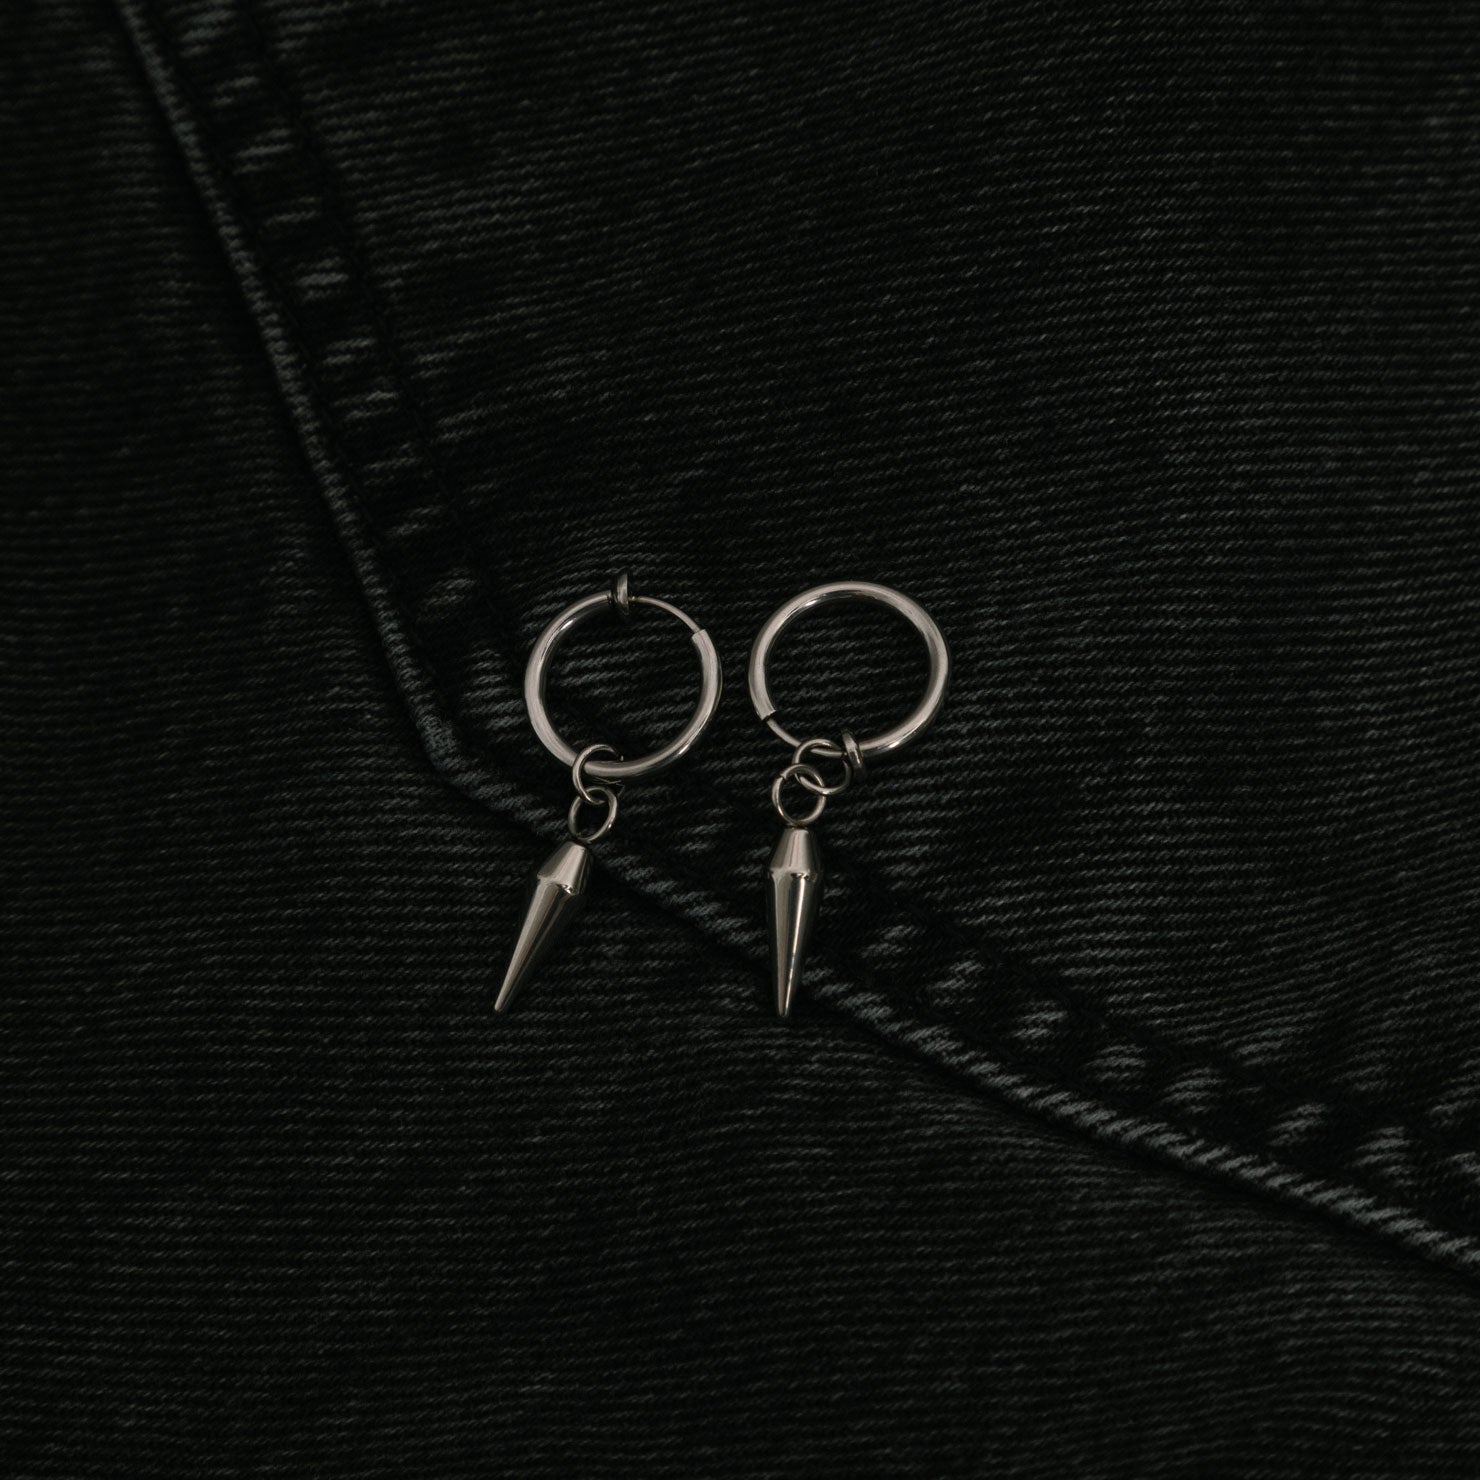 Image of the Dagger Clip On Earrings feature a sliding spring closure type, making them best suited to those with small or thin ears. The earrings are capable of providing a secure hold for an average of 2-4 hours, and have the ability to adjust automatically to the thickness of your earlobes. Crafted from stainless steel, each pair includes a single set of earrings.